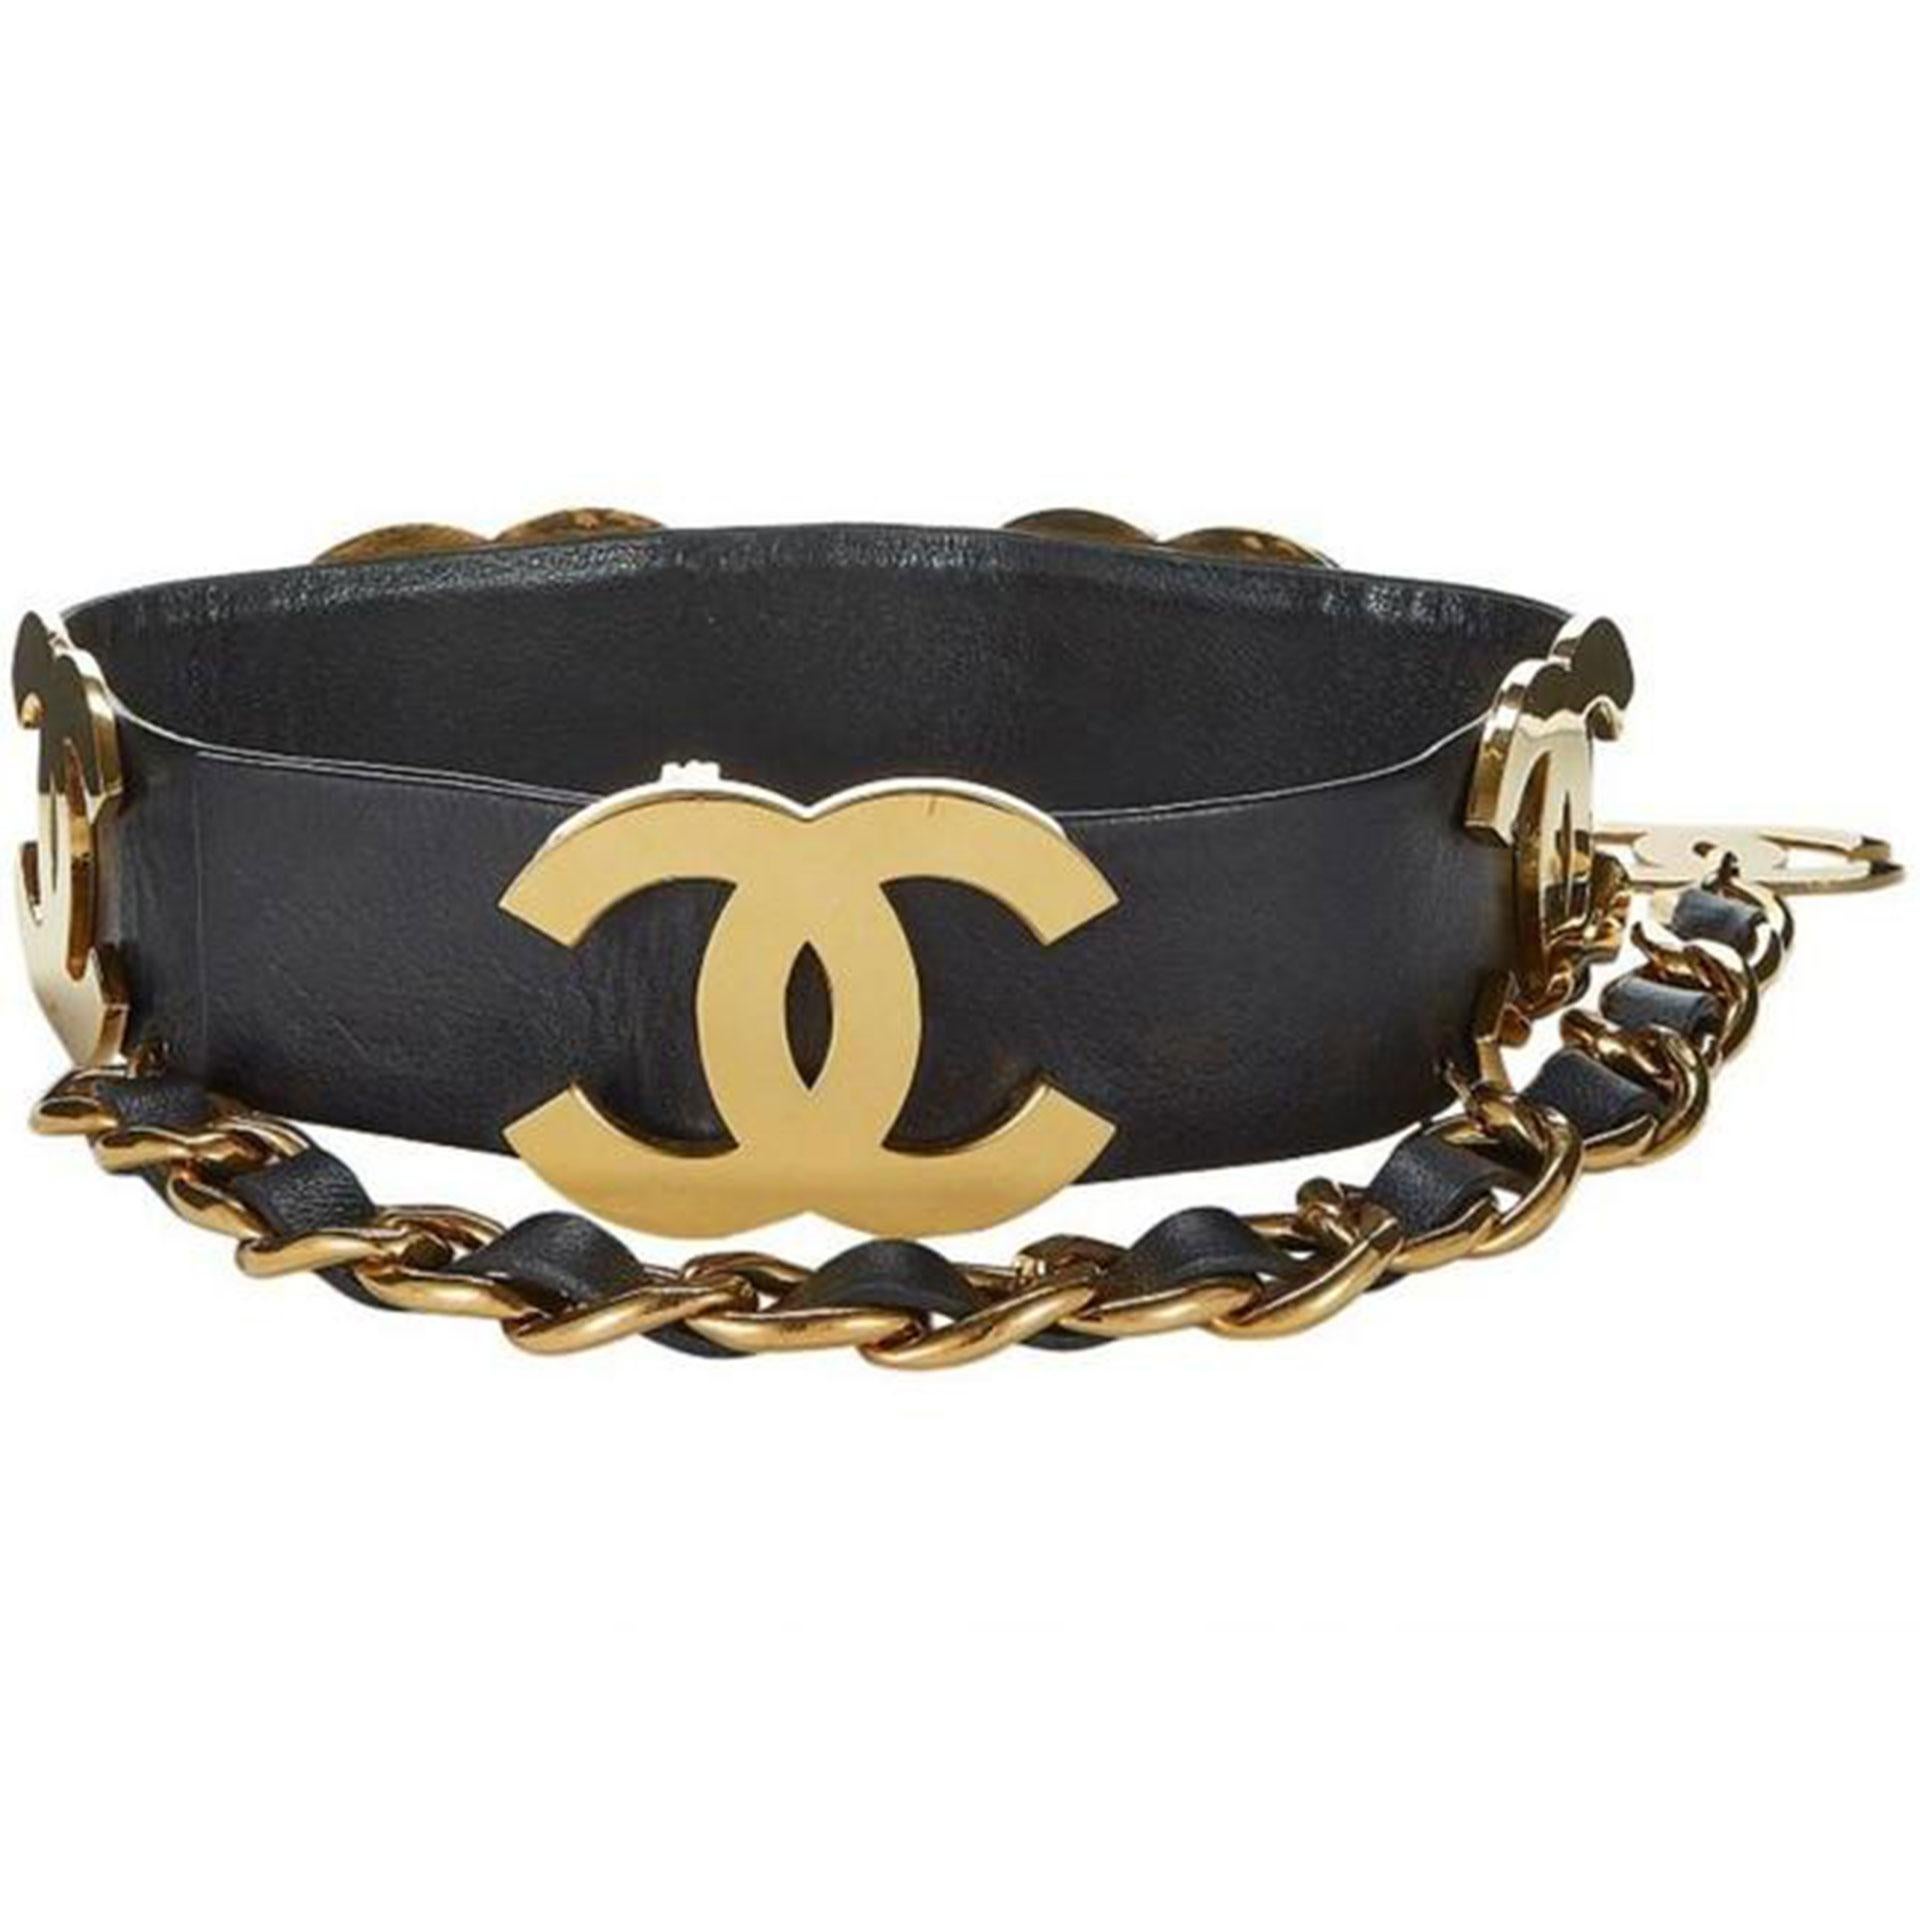 Chanel Gold Iconic Logo Cc Runway Vintage 1993 Very Rare Belt In Good Condition For Sale In Miami, FL